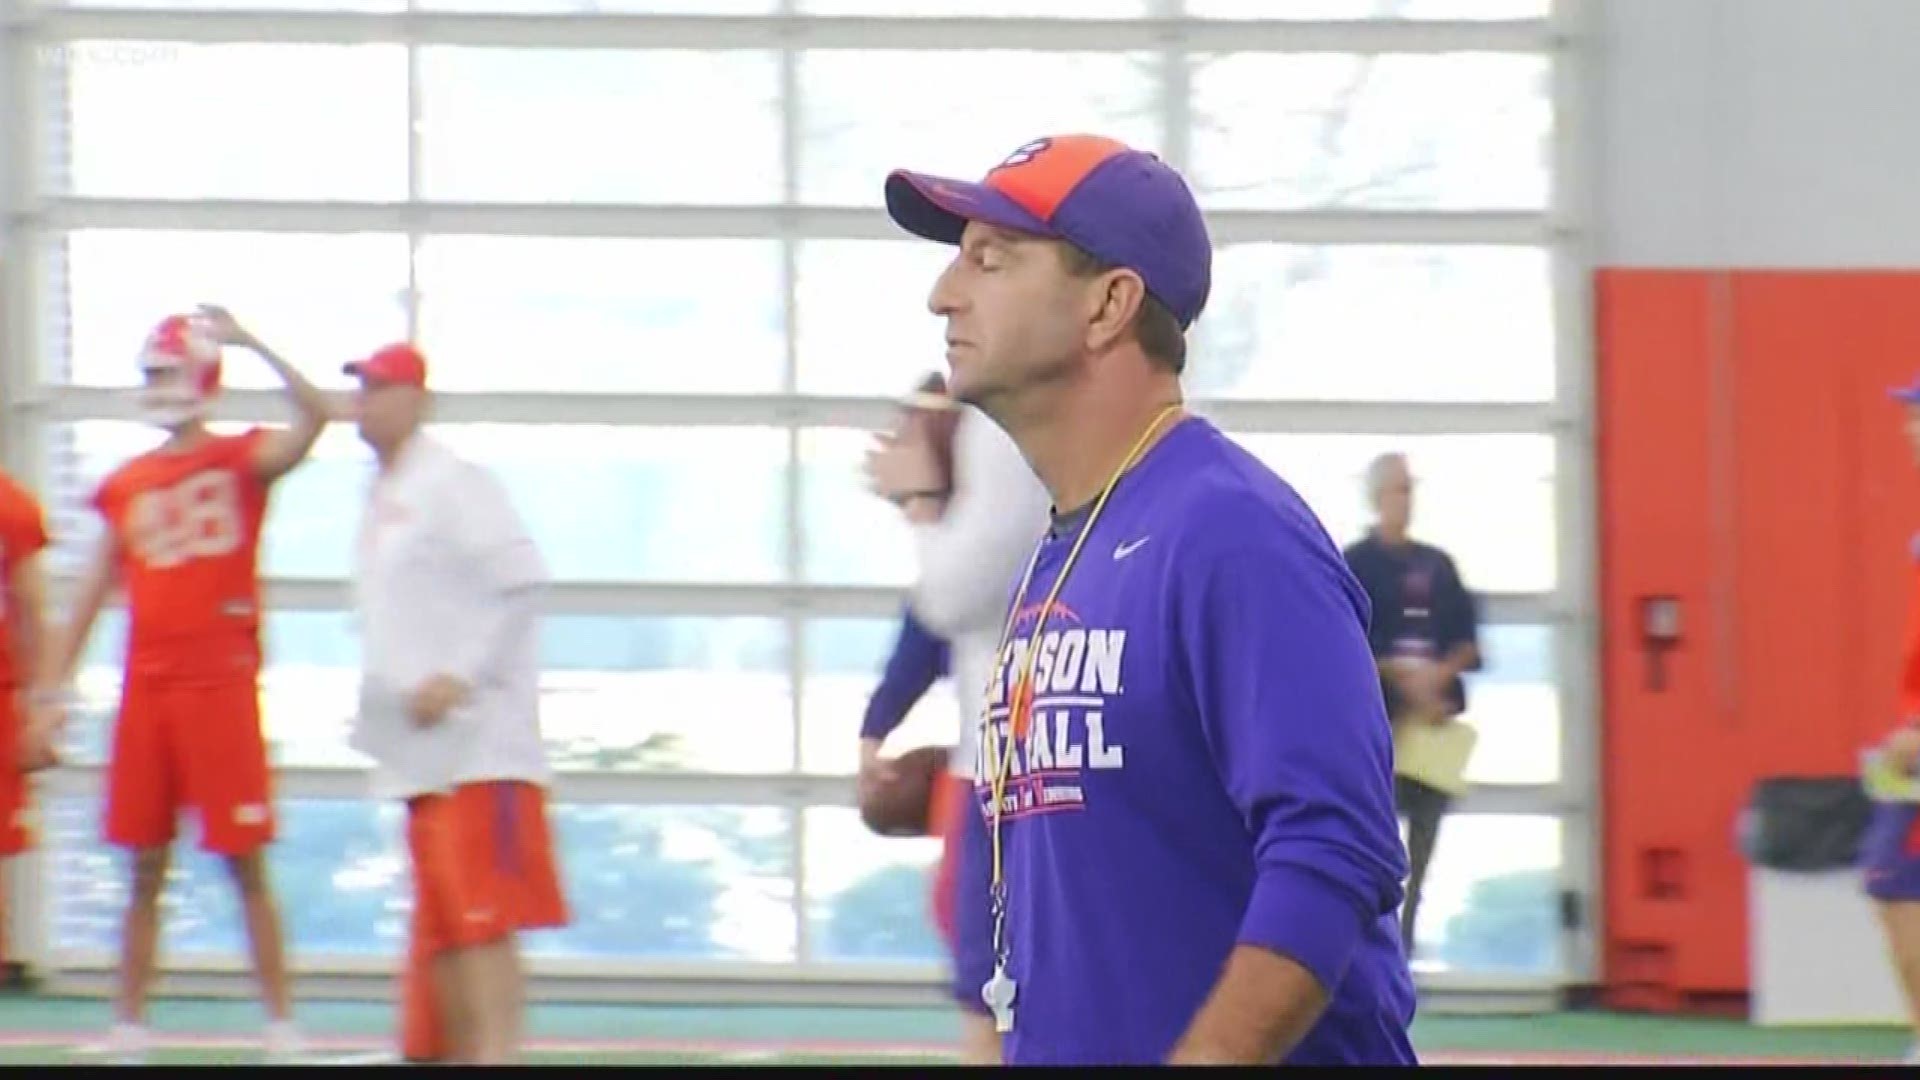 Clemson kicks off spring practice as the reset button has been pressed.